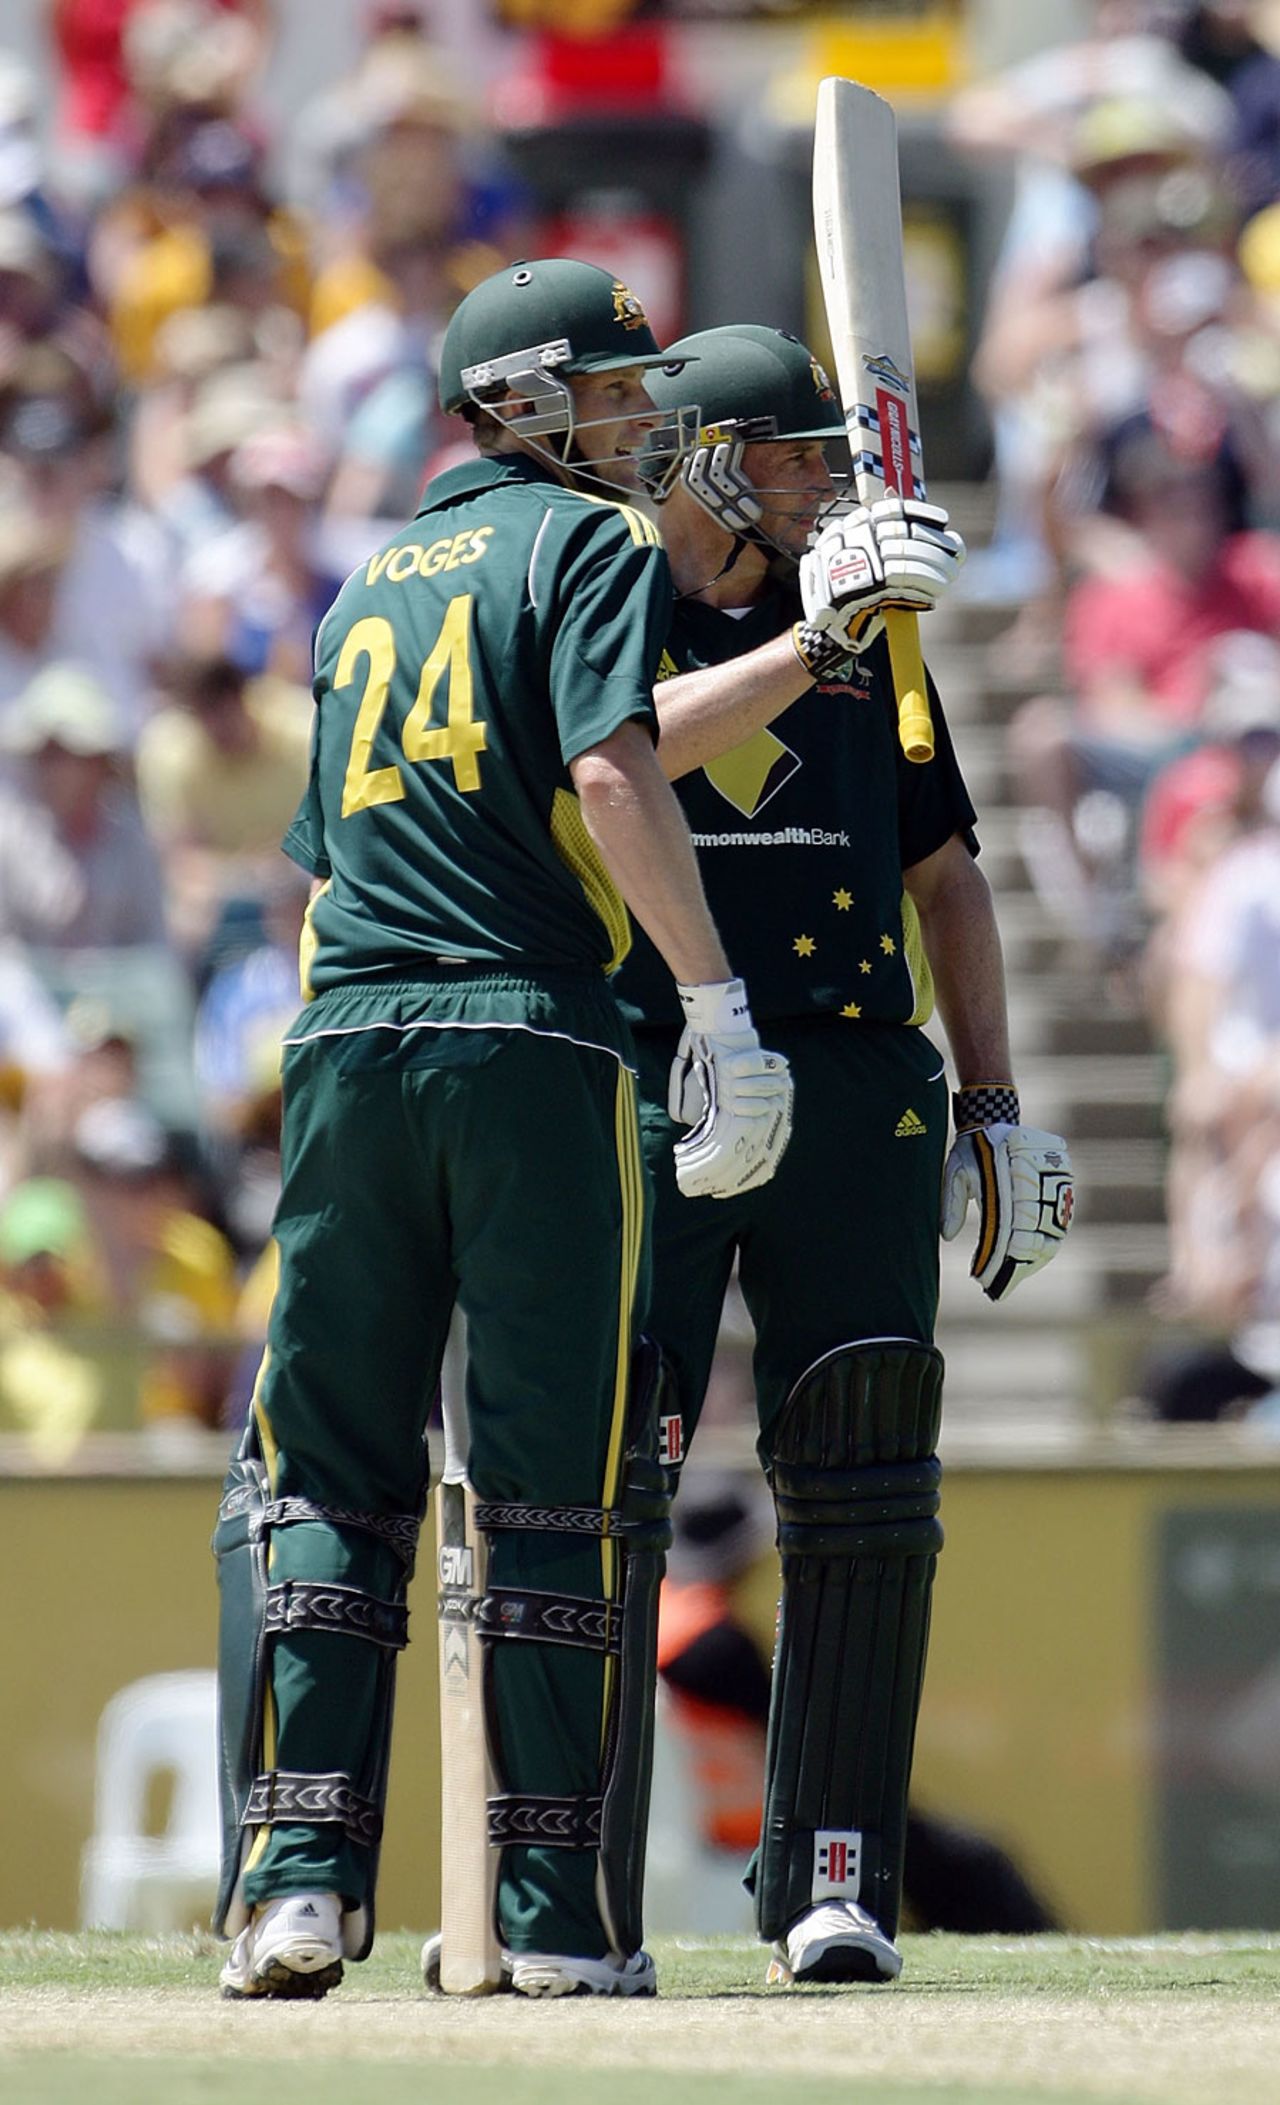 Adam Voges and David Hussey revived Australia's innings with a 95-run stand, Australia v England, 7th ODI, Perth, February 6 2011